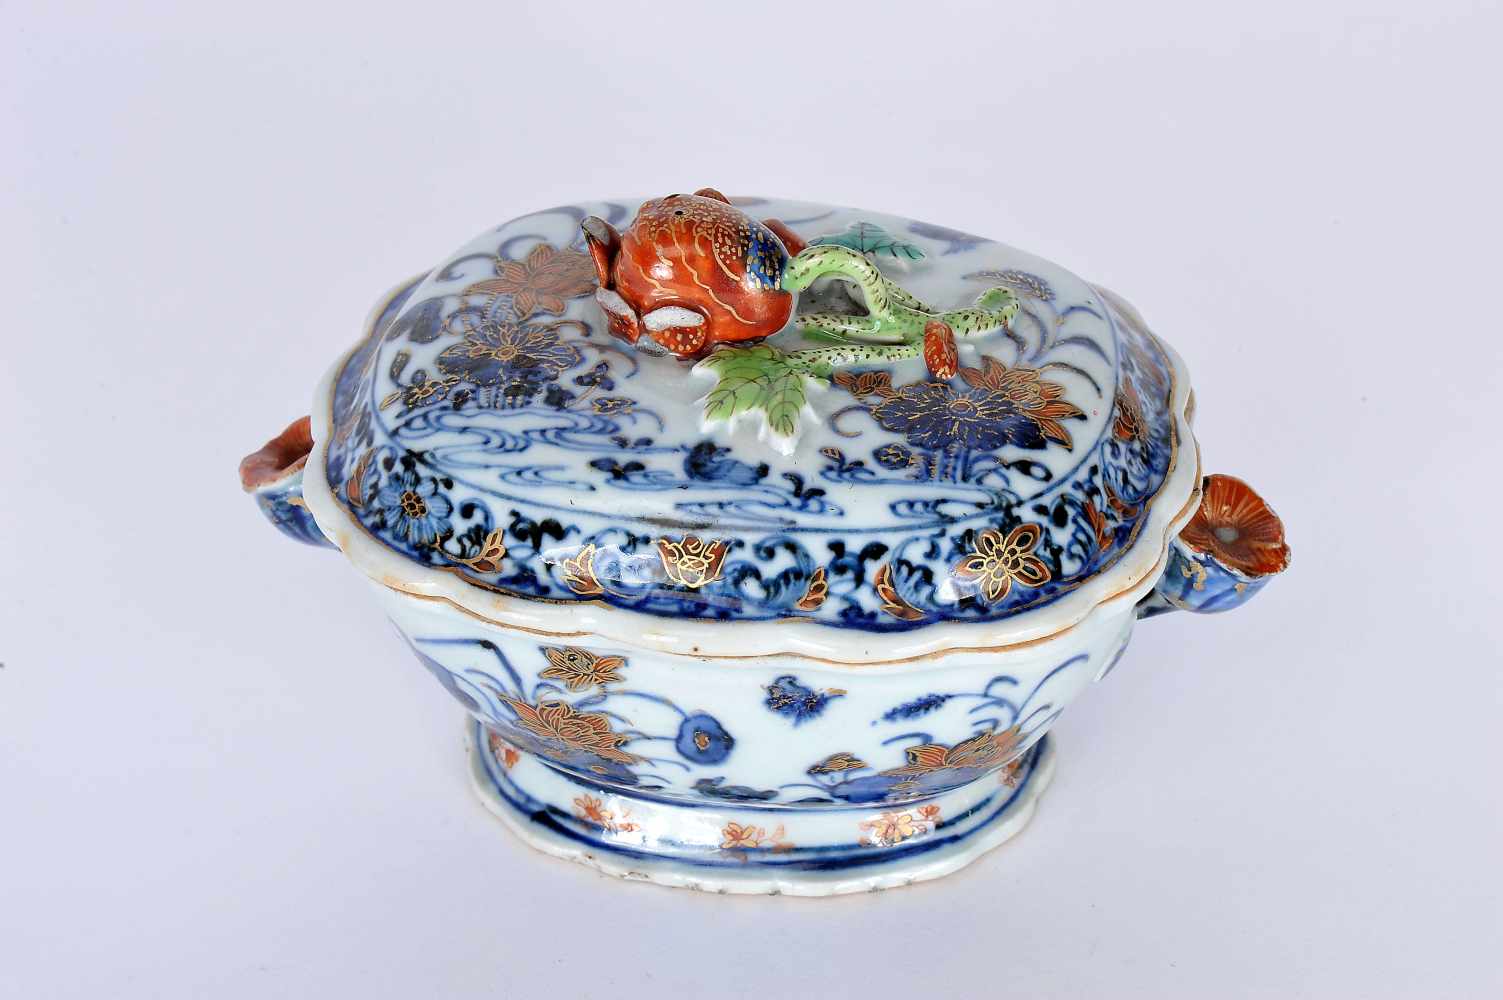 A Smal Scalloped Tureen, Chinese export porcelain, polychrome and gilt decoration "Flowers", handles - Image 2 of 2